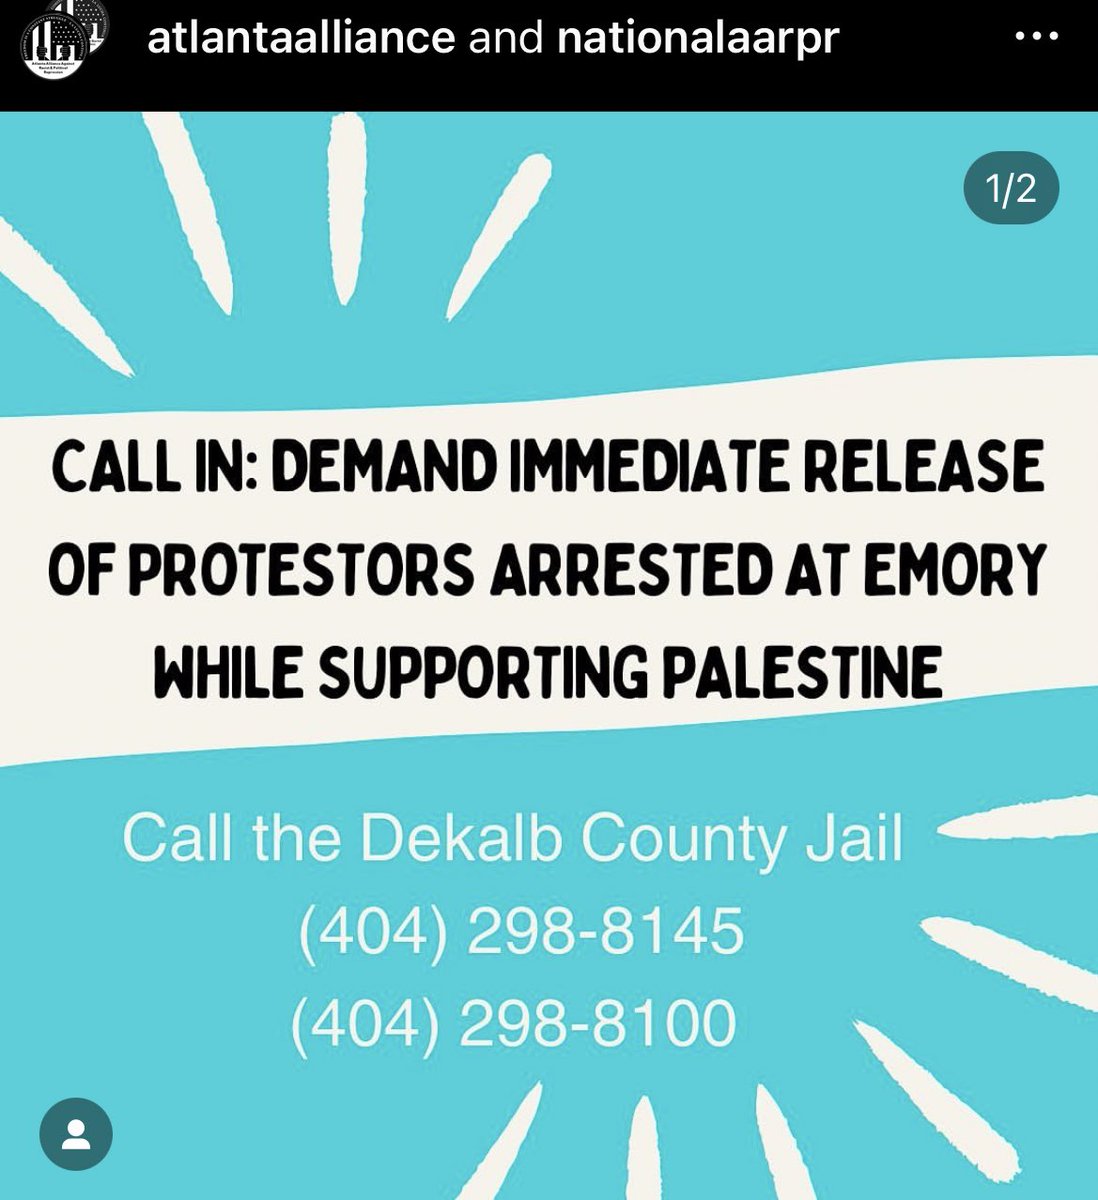 PLEASE share, call, and donate!! Support the brave protesters at Emory who were brutalized and arrested while supporting Palestine!!!